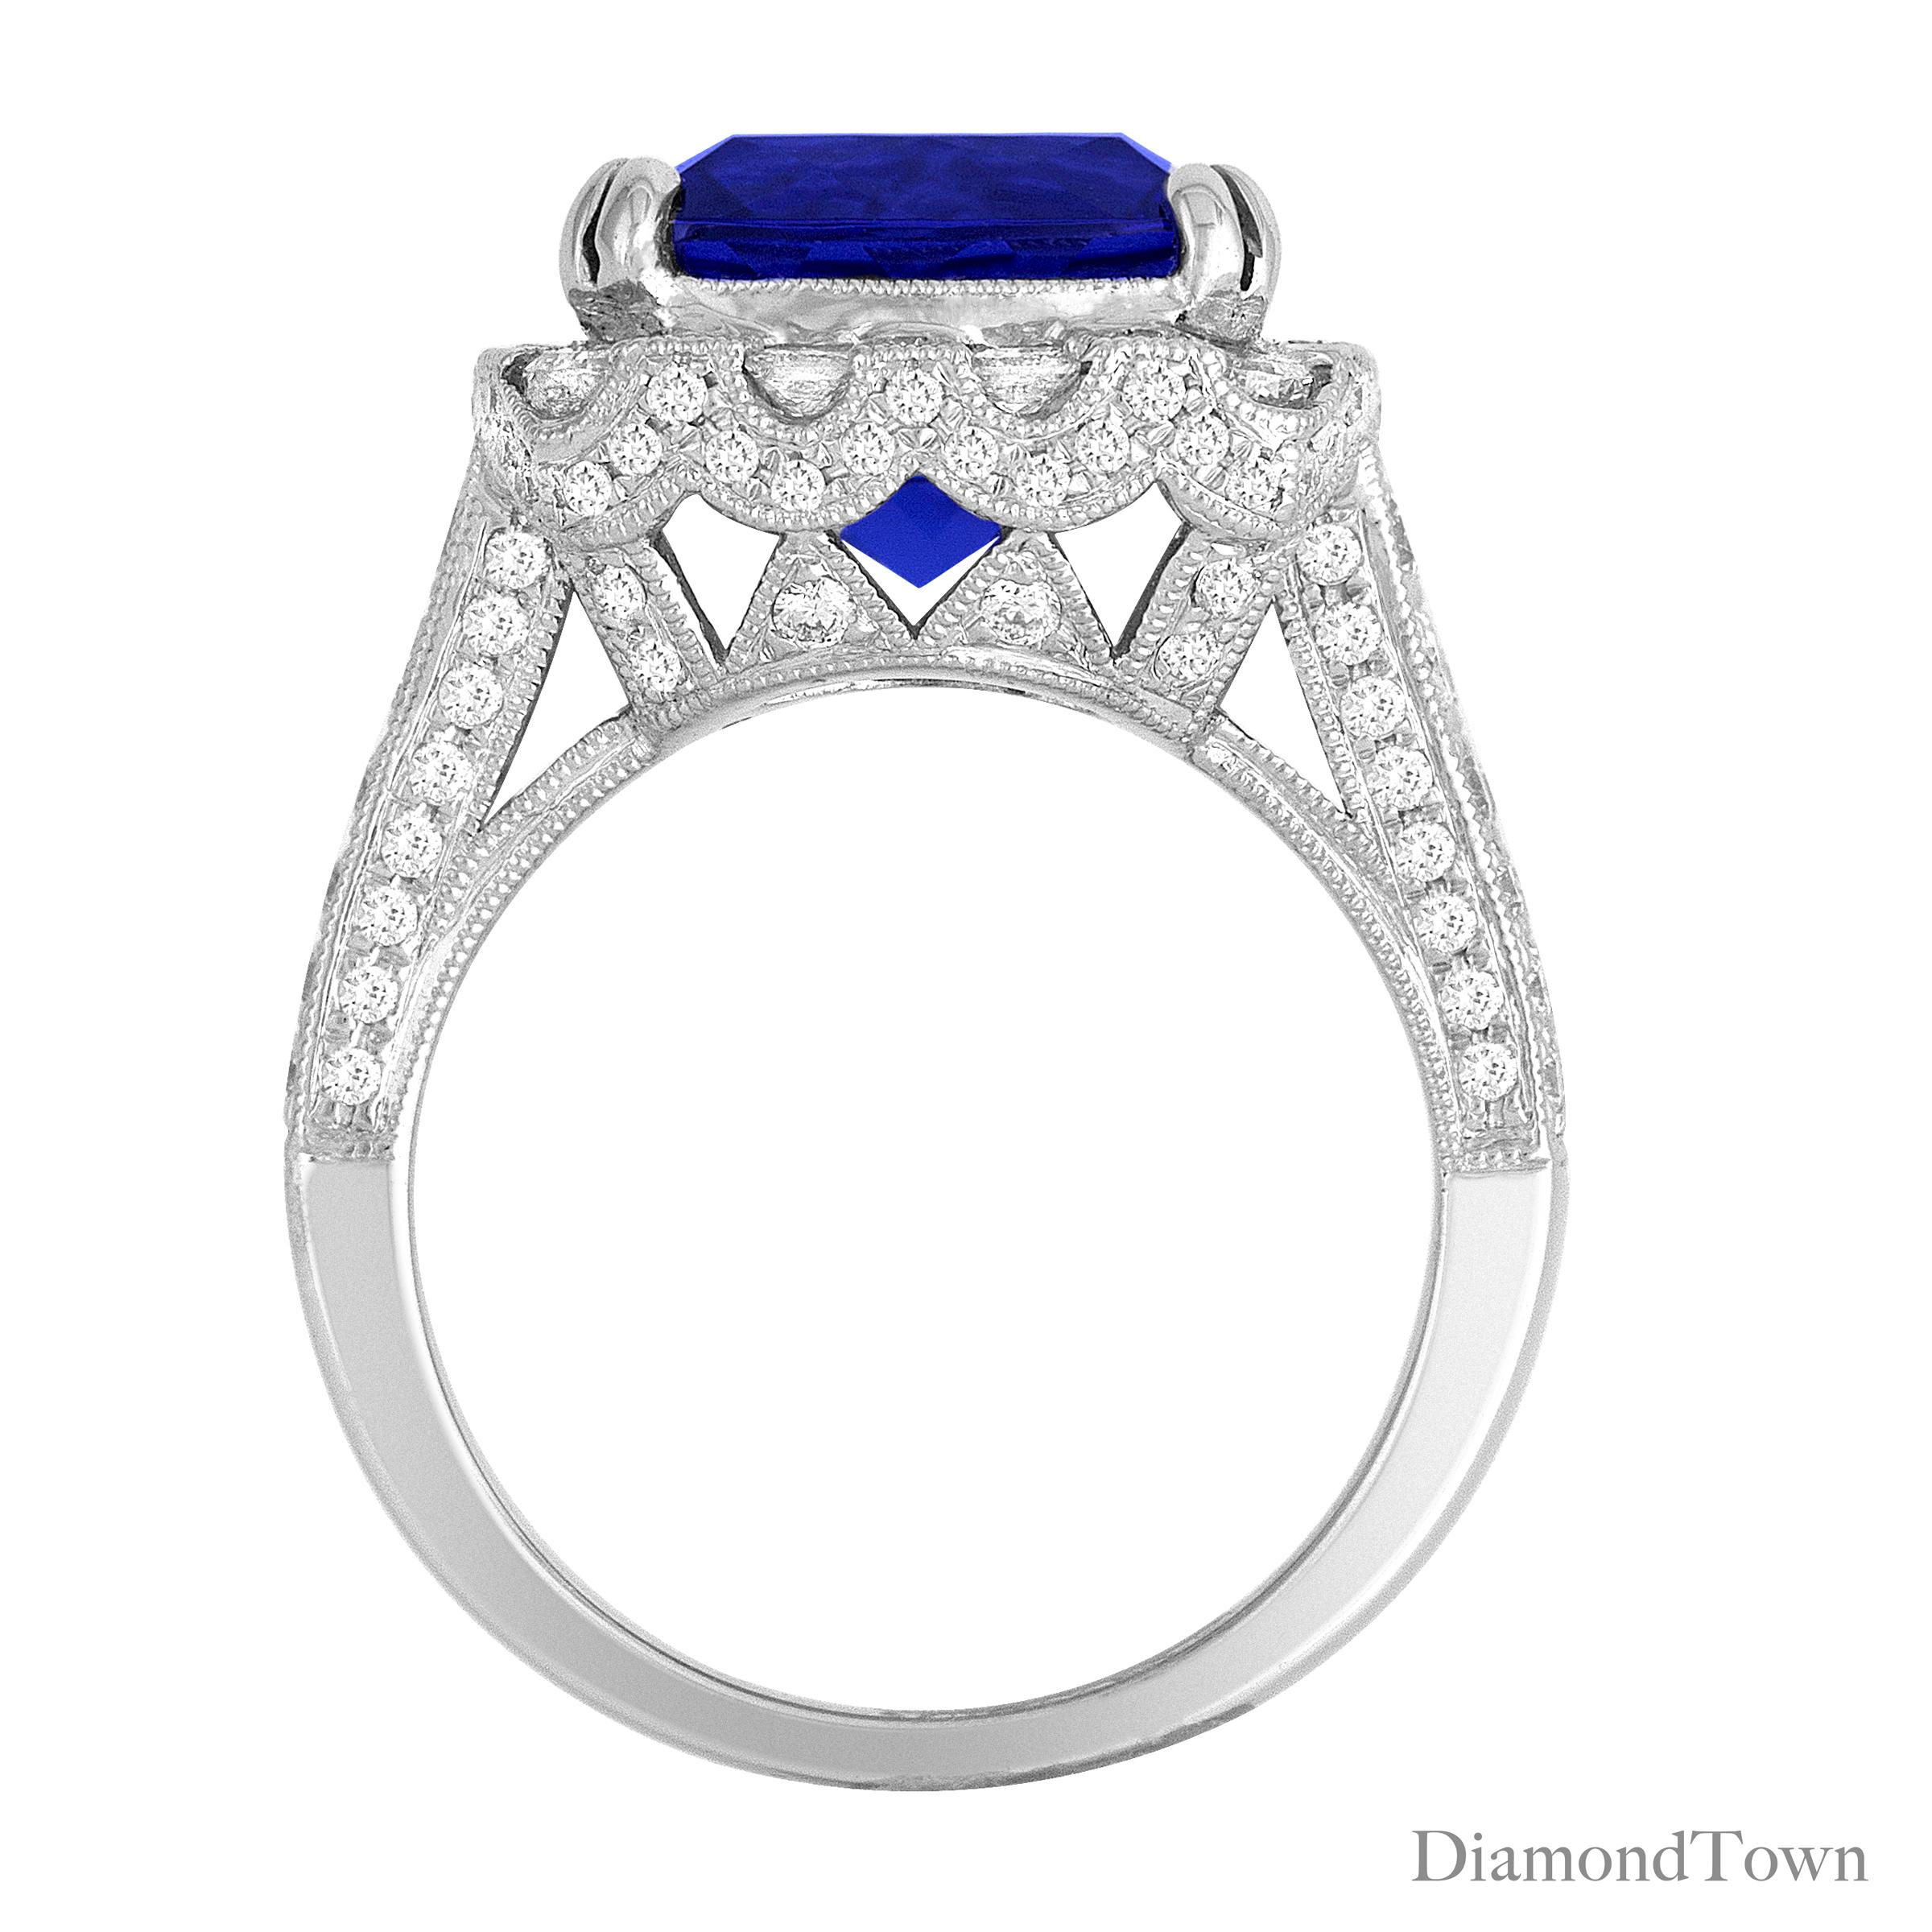 (DiamondTown) This gorgeous ring has an Cushion Cut Tanzanite center measuring 6.99 carats, surrounded by a halo of round white diamonds. Additional diamonds decorate the side shank.

Center: 6.99 Carat Tanzanite Cushion
Halo:  8 Princess and 8